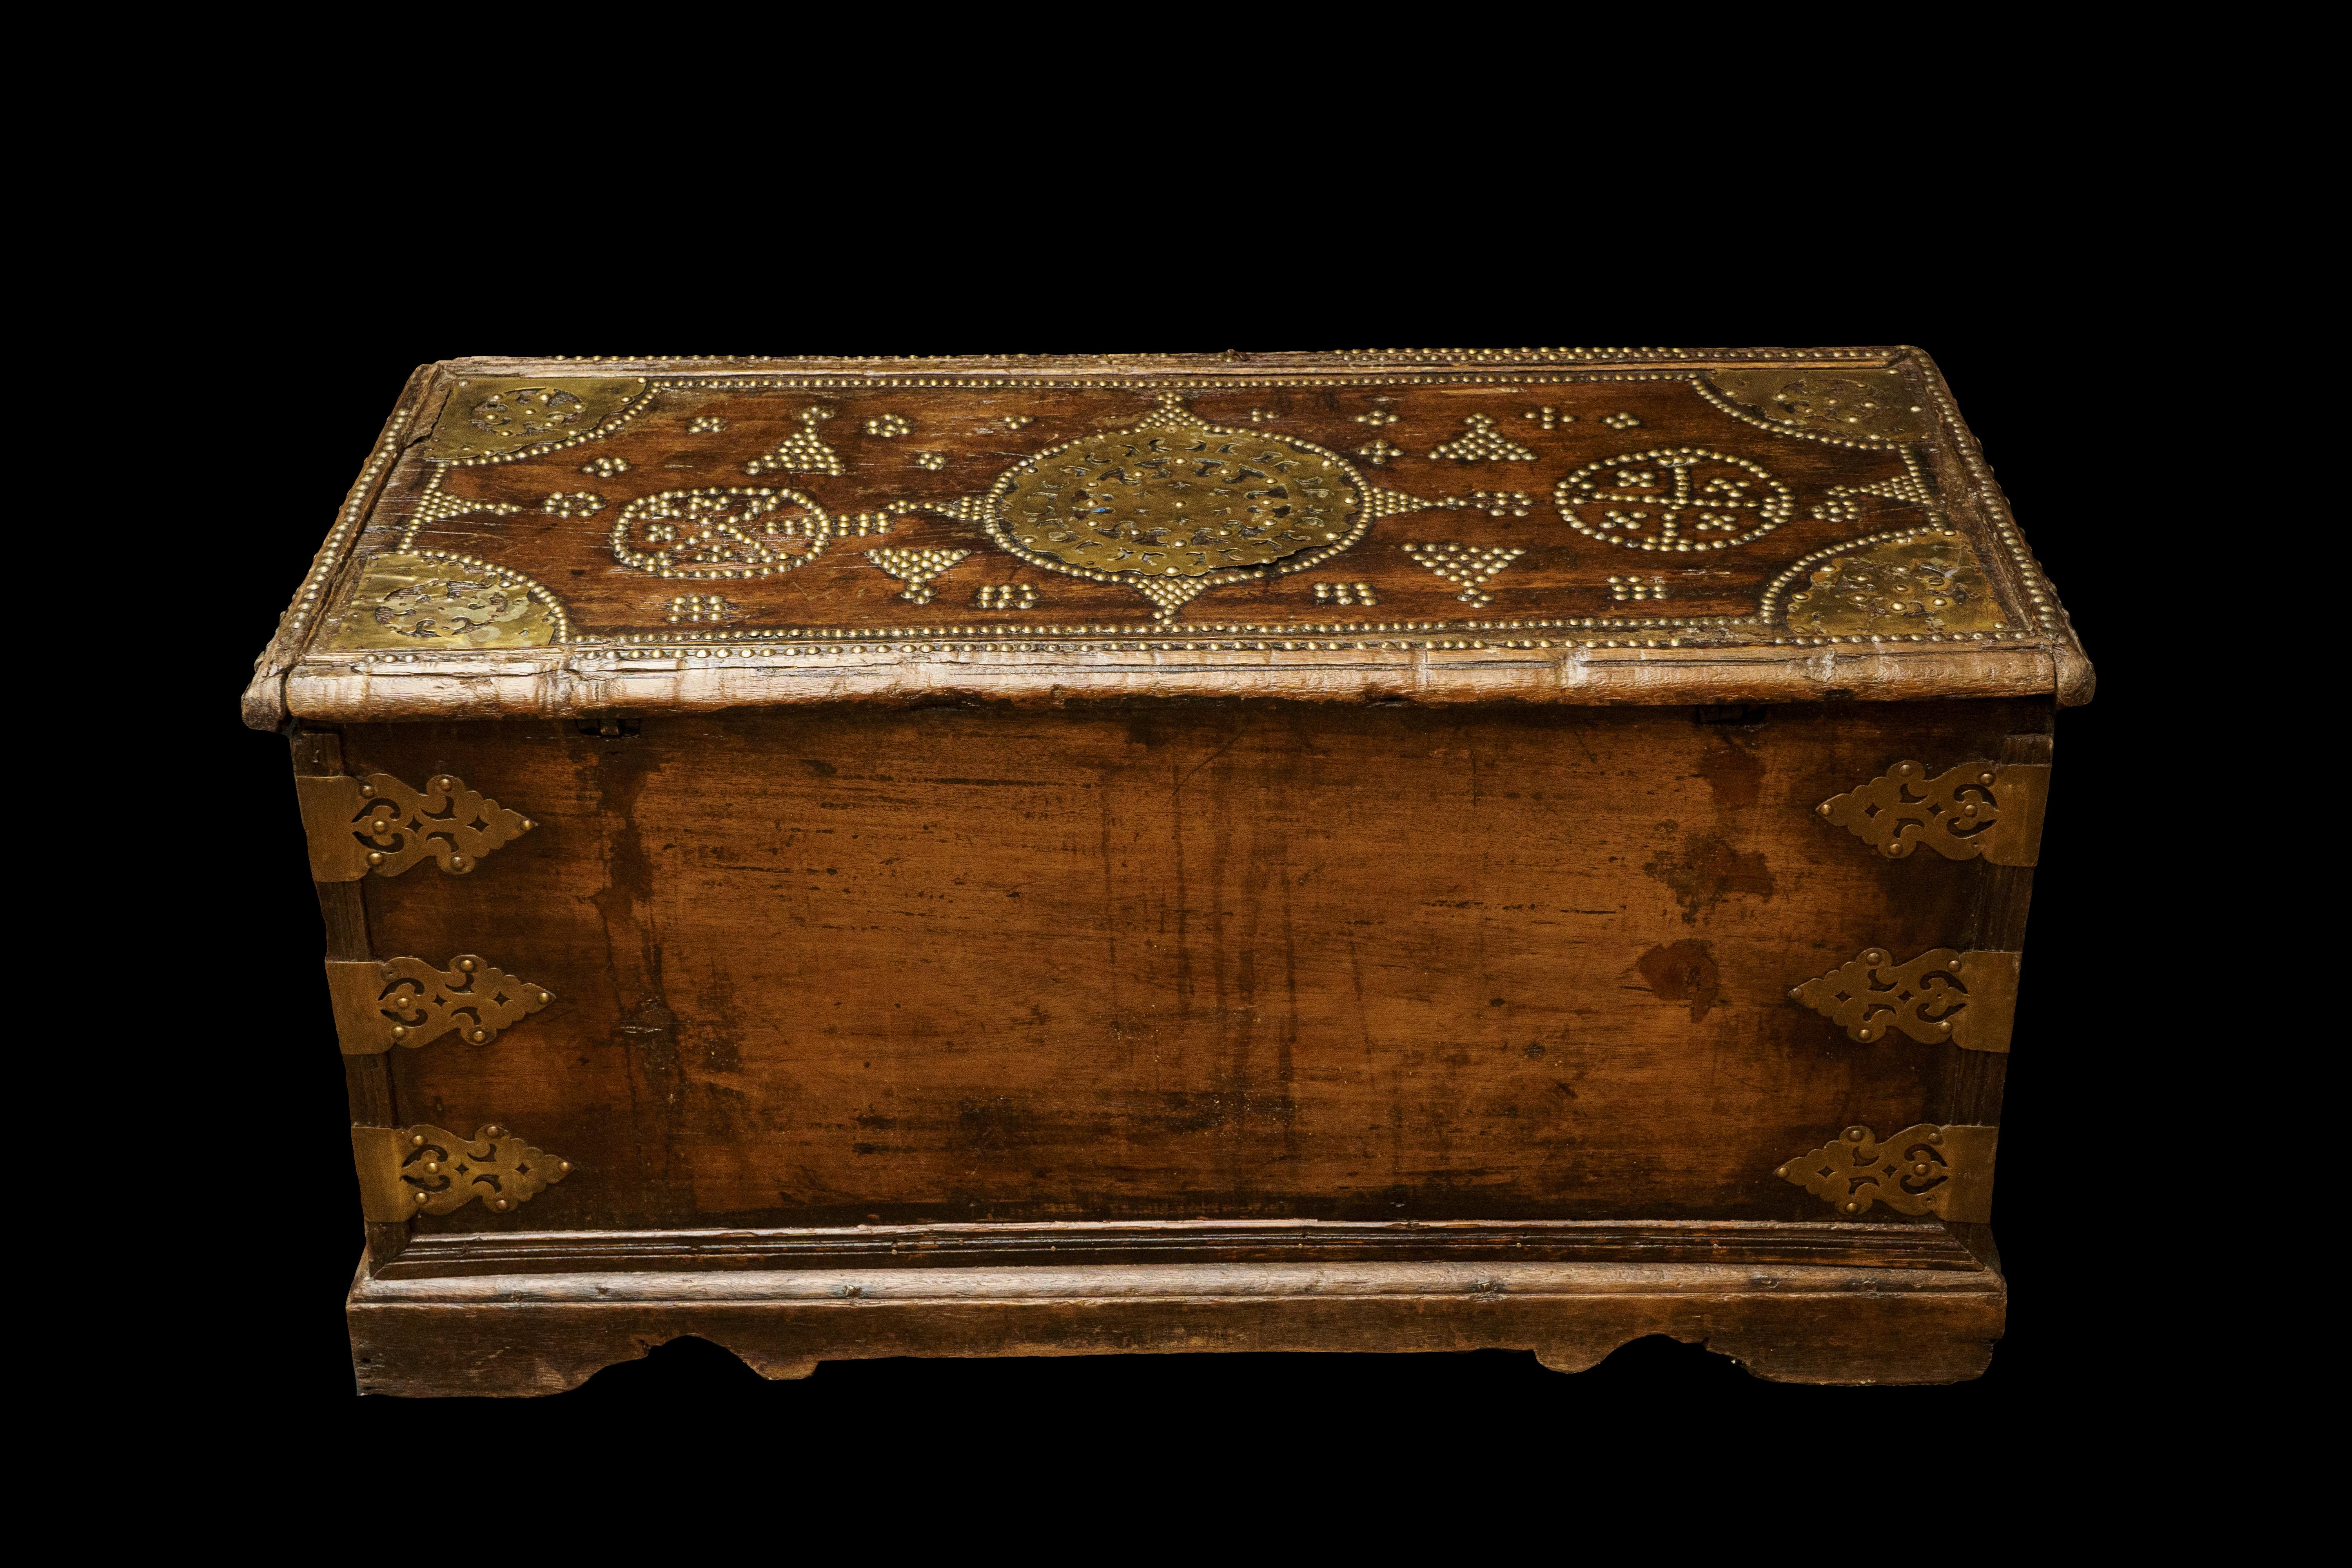 18th Century Continental Storage Chest with brass strapwork and studs.

Measures: 44